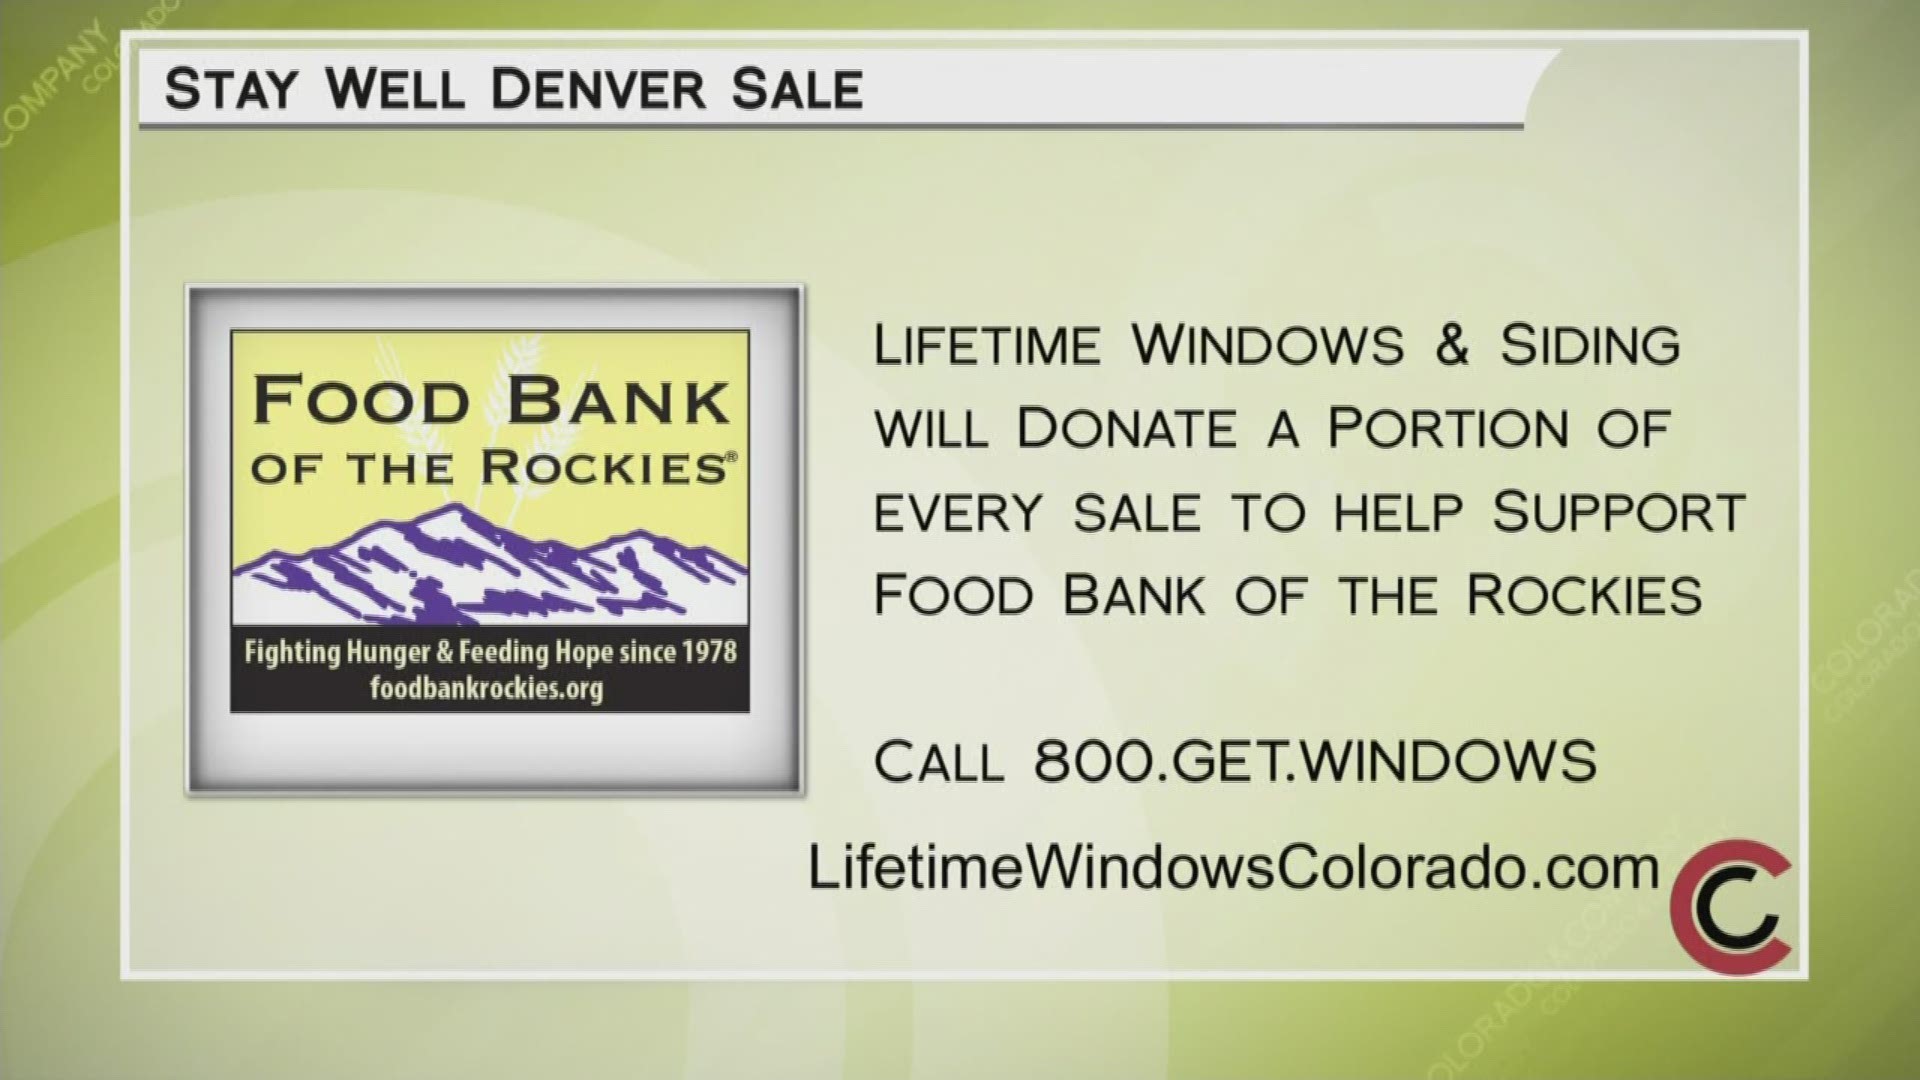 Visit LifetimeWindowsColorado.com or call 800.GET.WINDOWS to get 40% off windows, doors, siding and install. Part of all sales will go to Food Bank of the Rockies